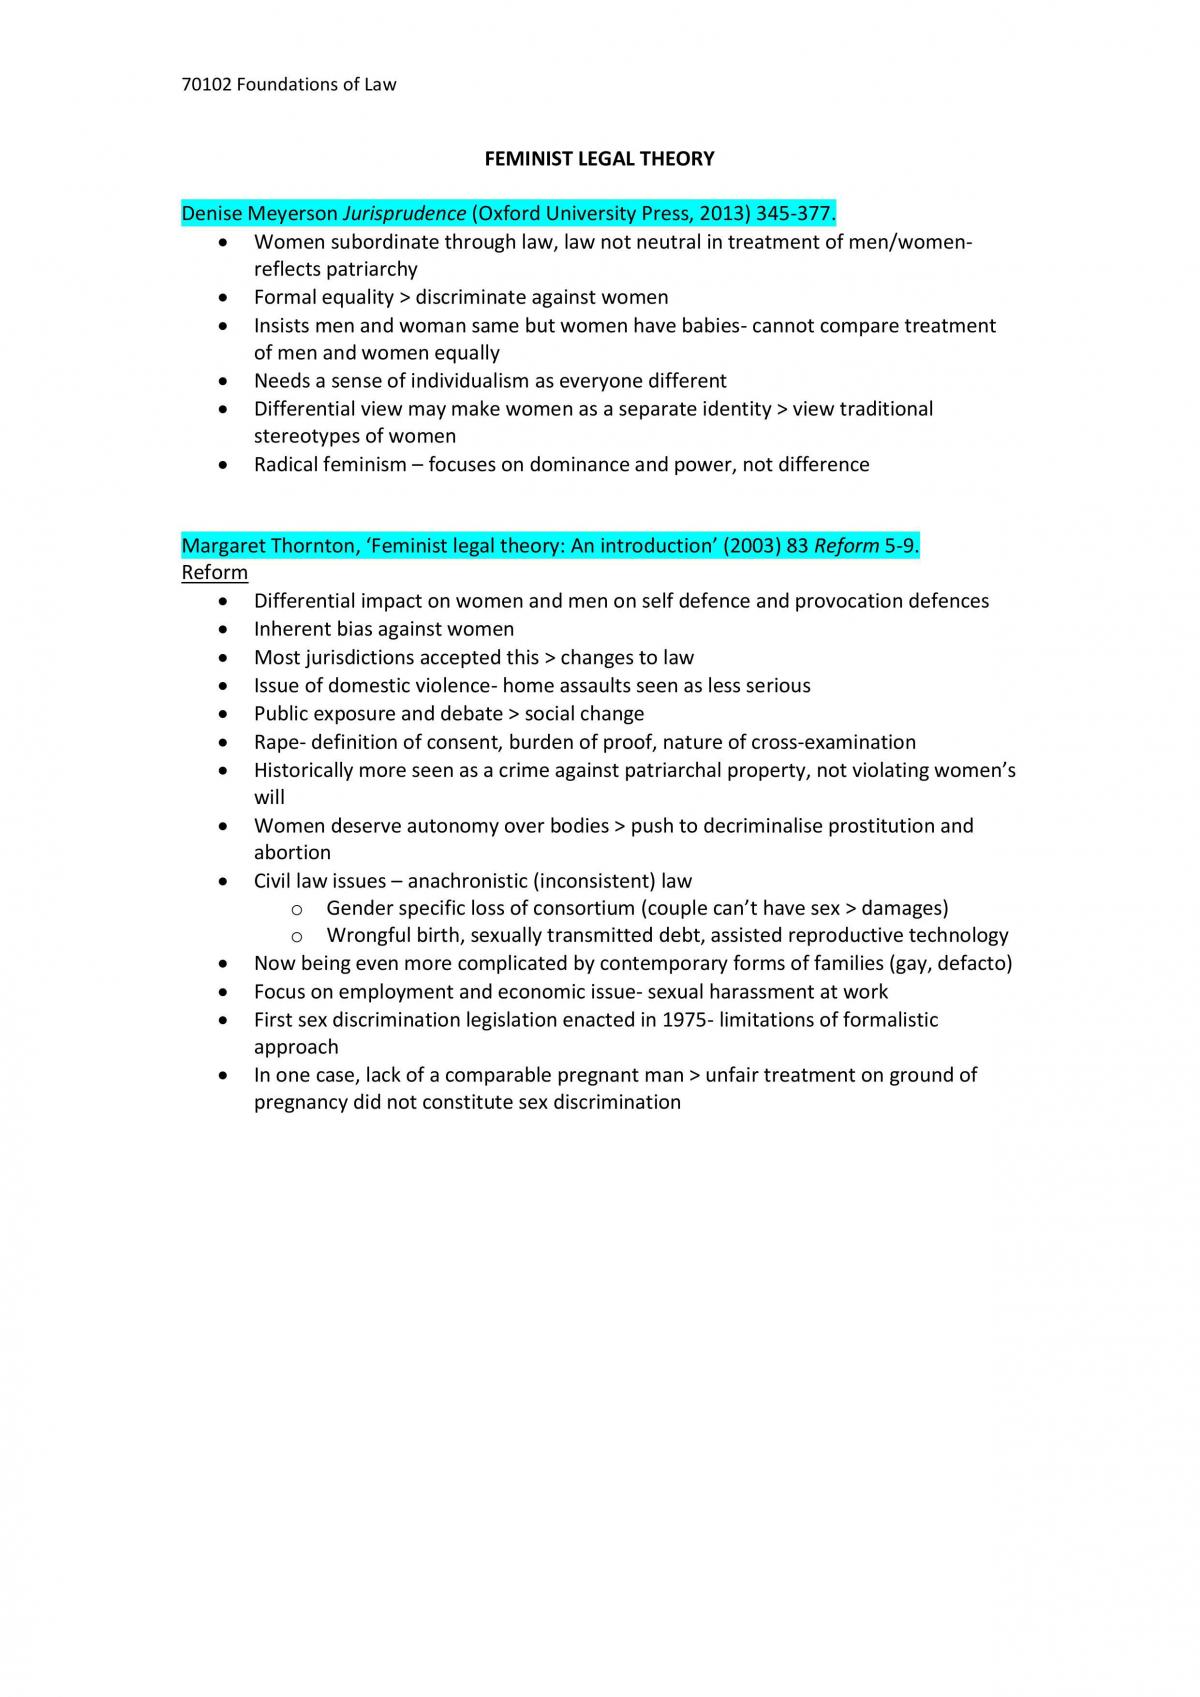 Foundations of Law Final Exam Notes- Autumn 2014 - Page 23